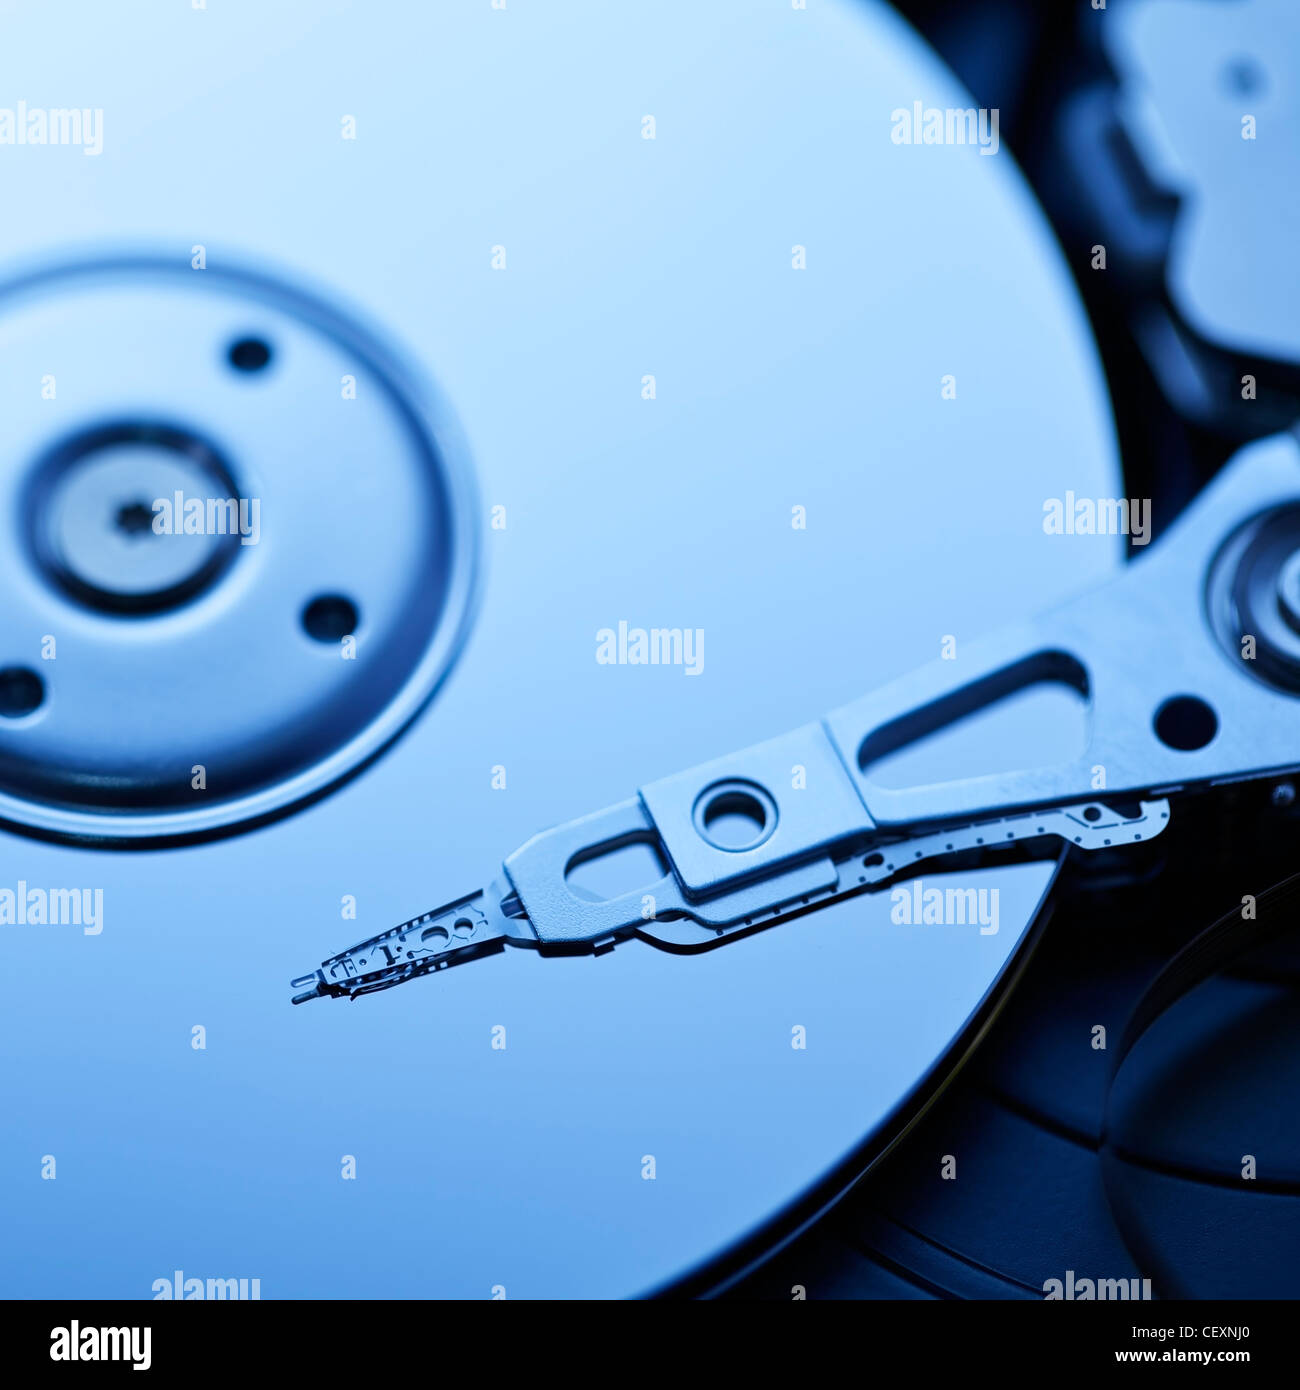 Hard disk, square composition. Shallow depth of field. Stock Photo